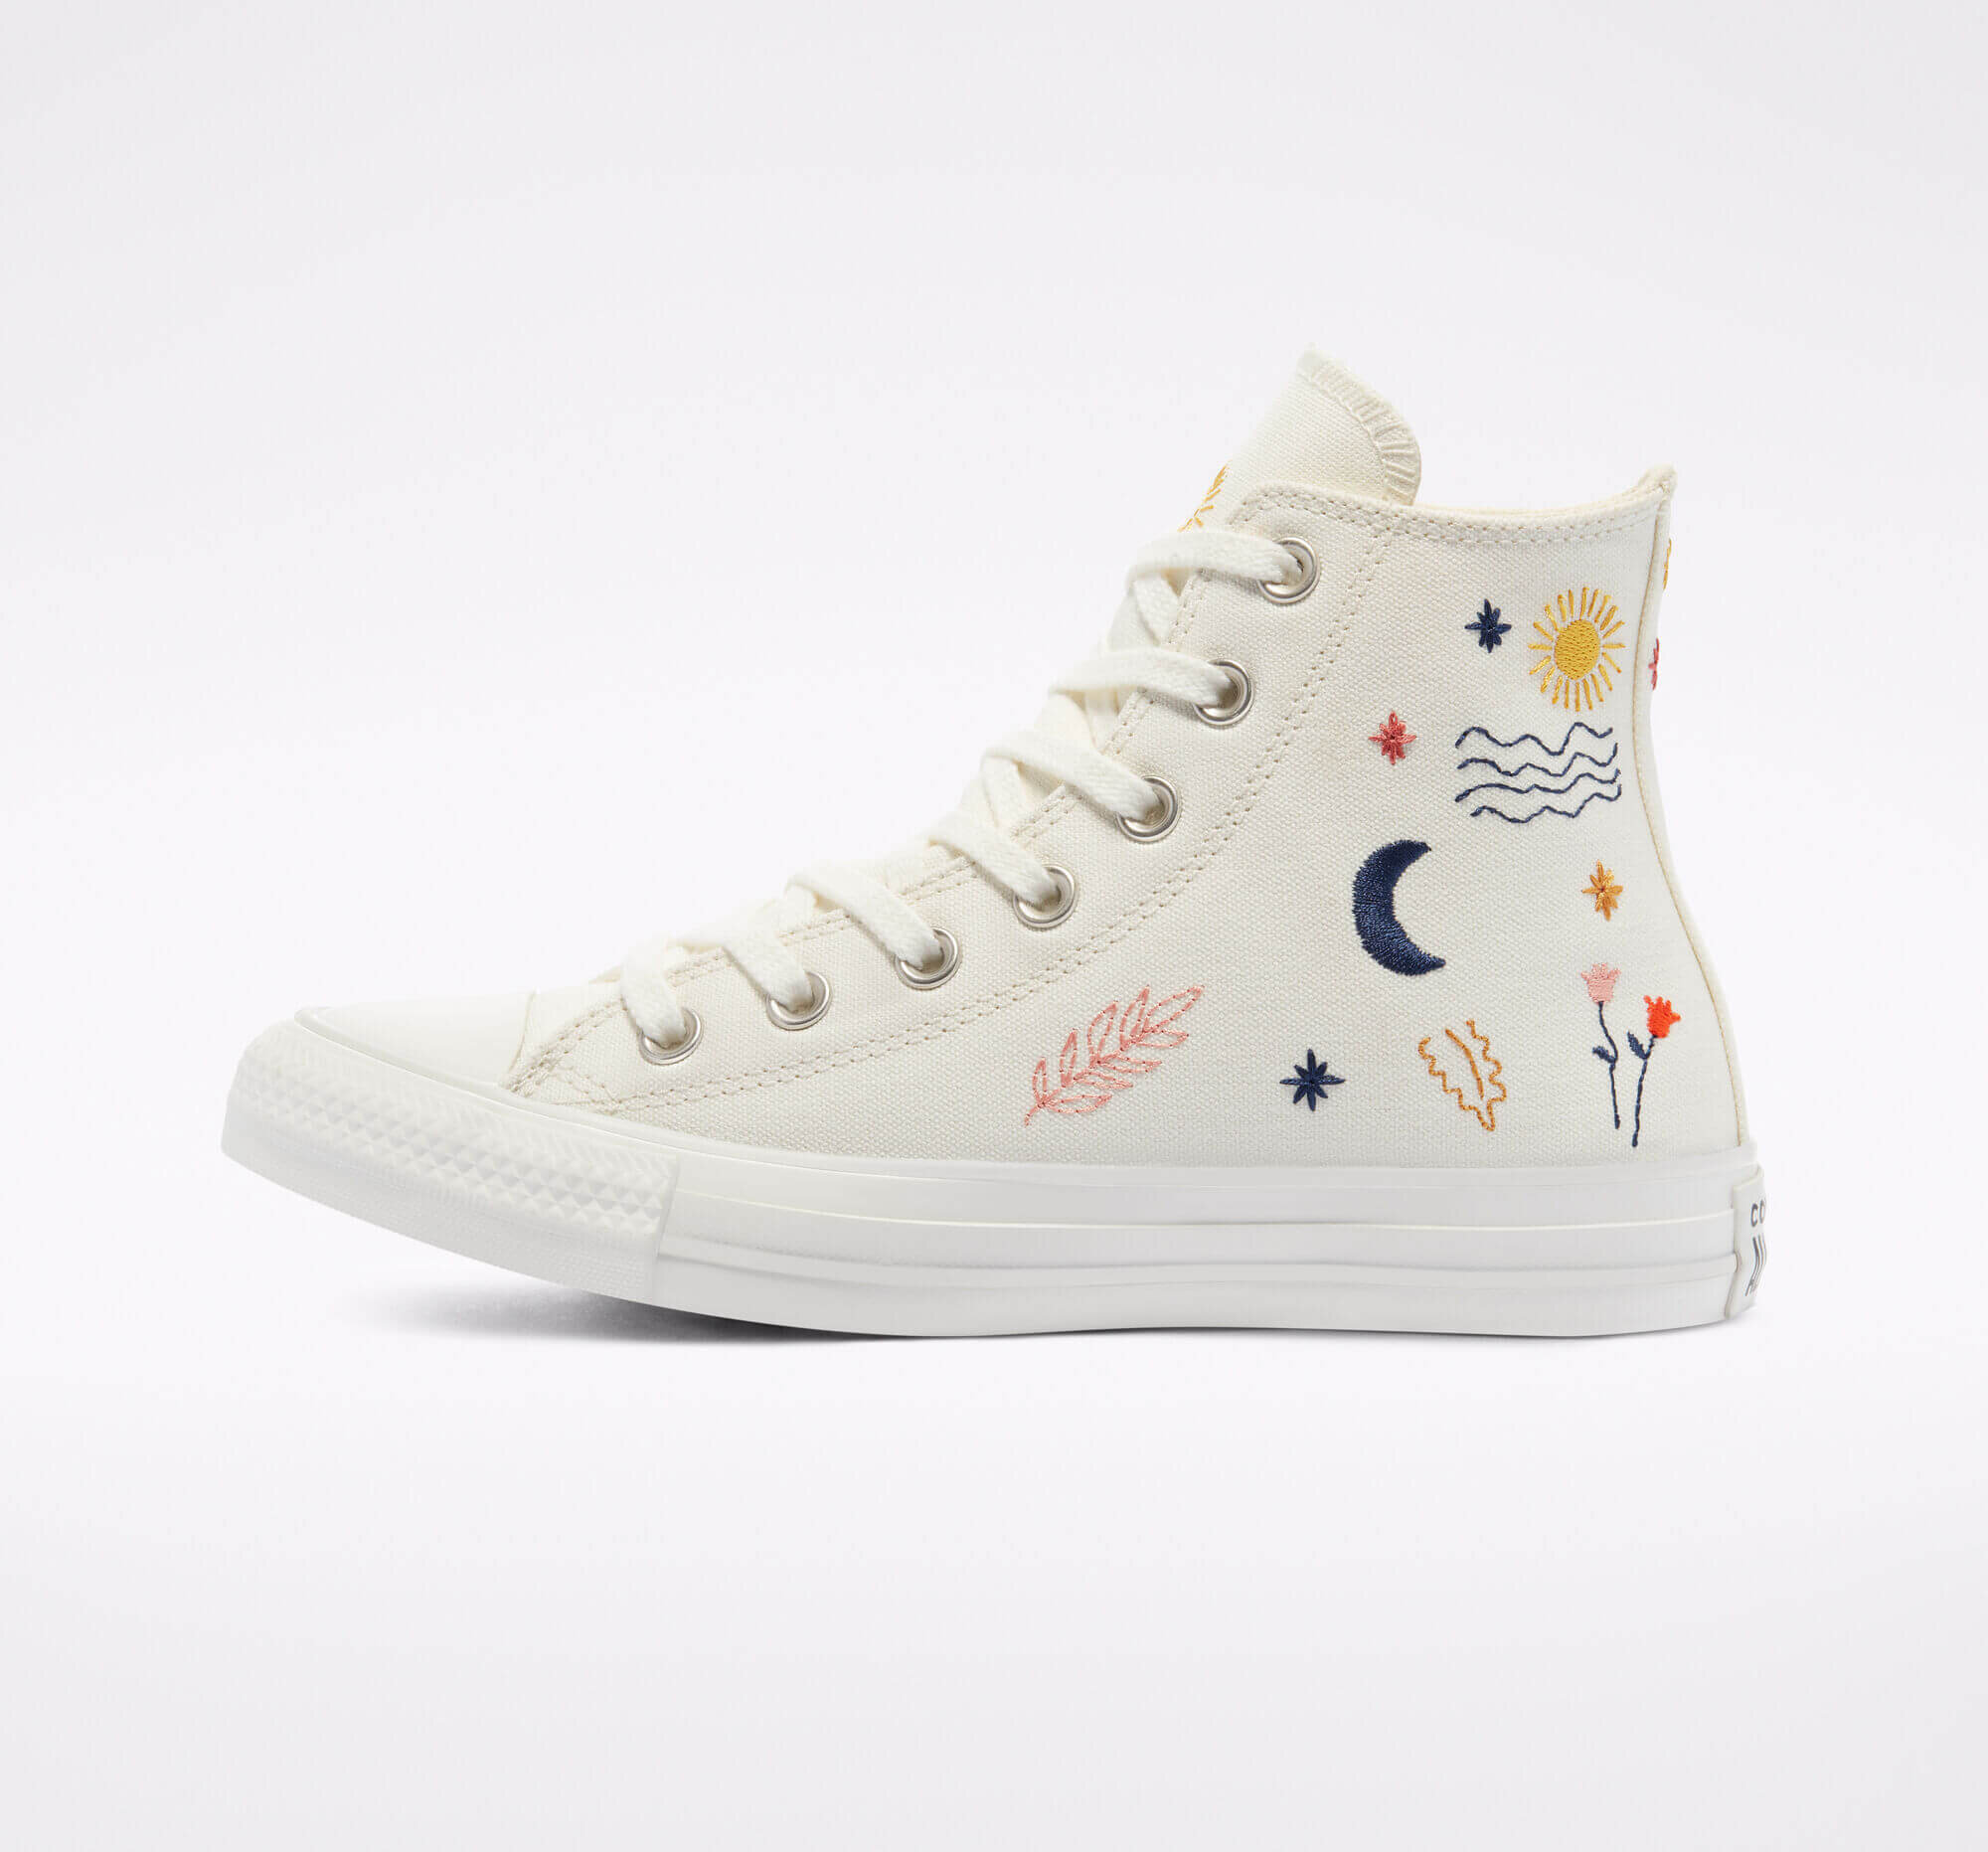 CNK-Converse-My-Story-Collection-Its-Okay-To-Wander-Egret-Vintage-White-All-Star-High-2.jpg